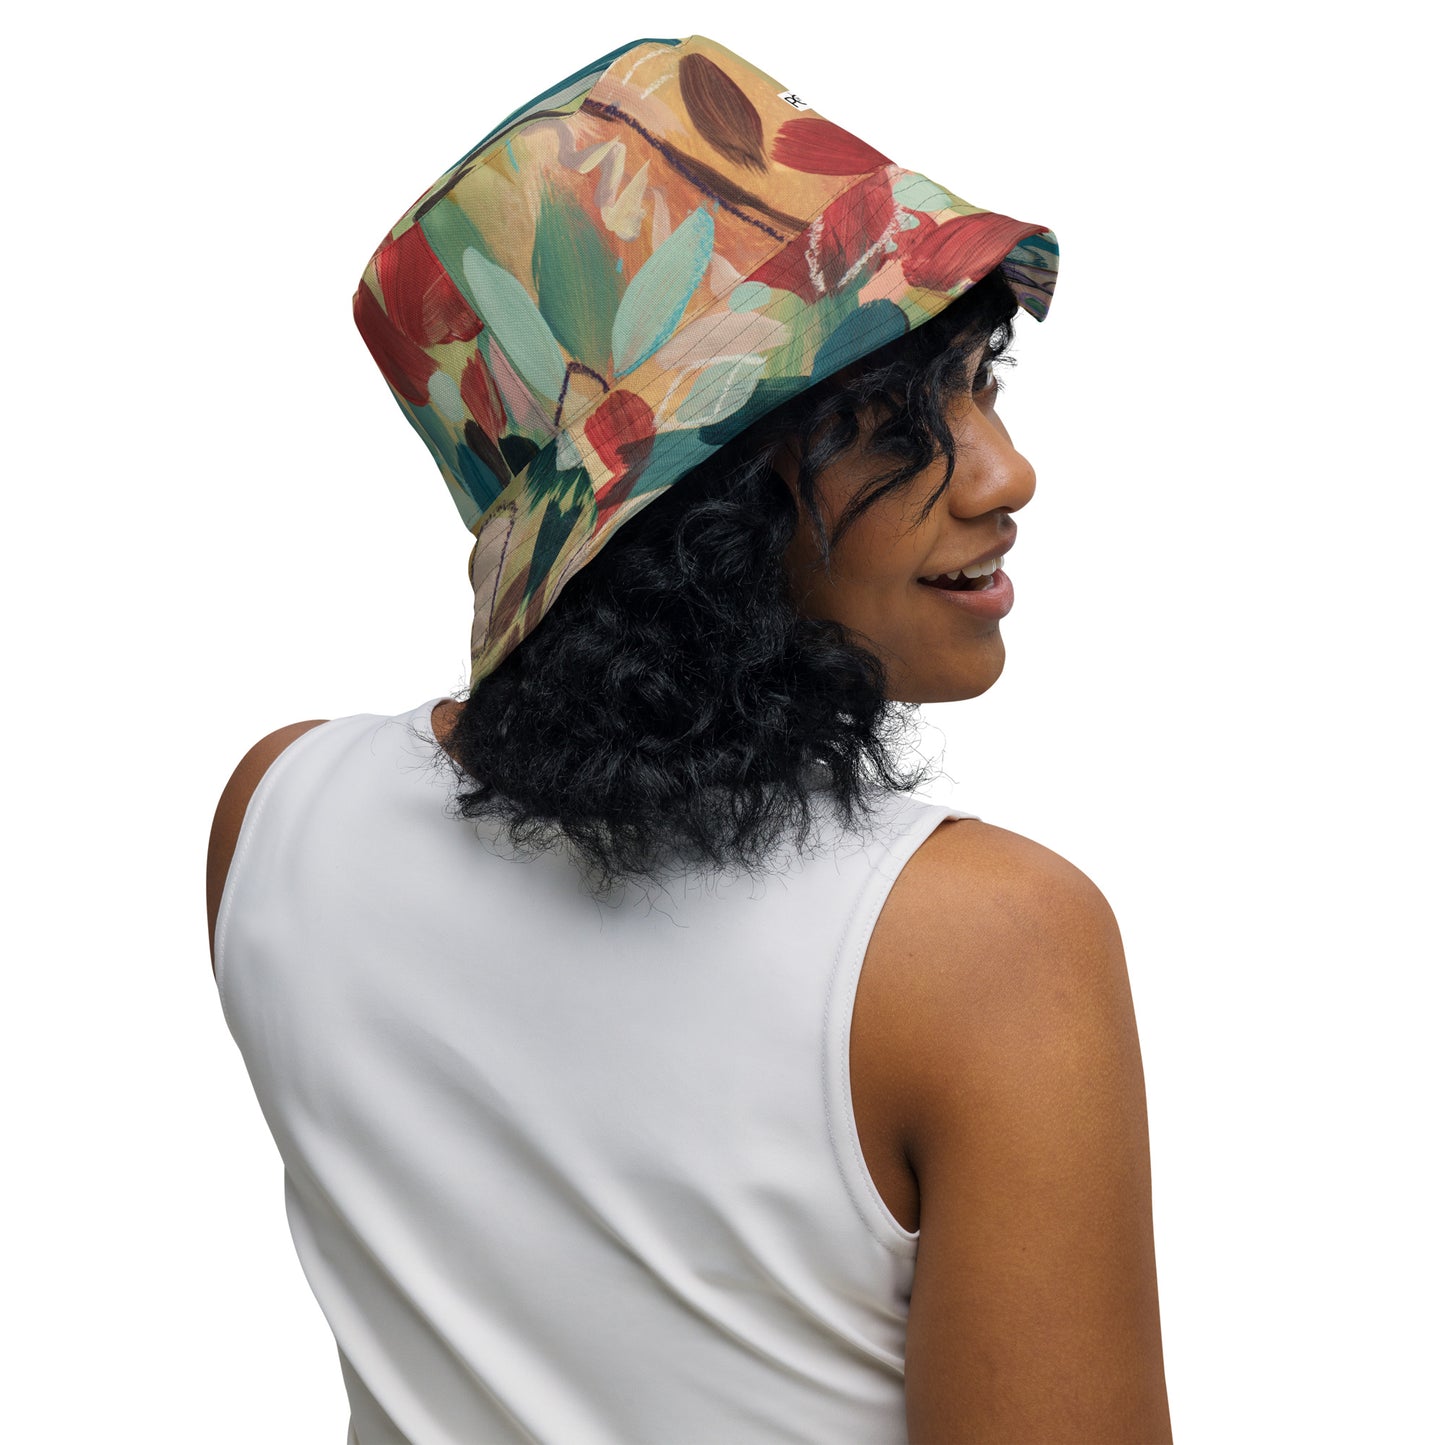 Reckless Succulent / Asking for Flowers  Reversible bucket hat